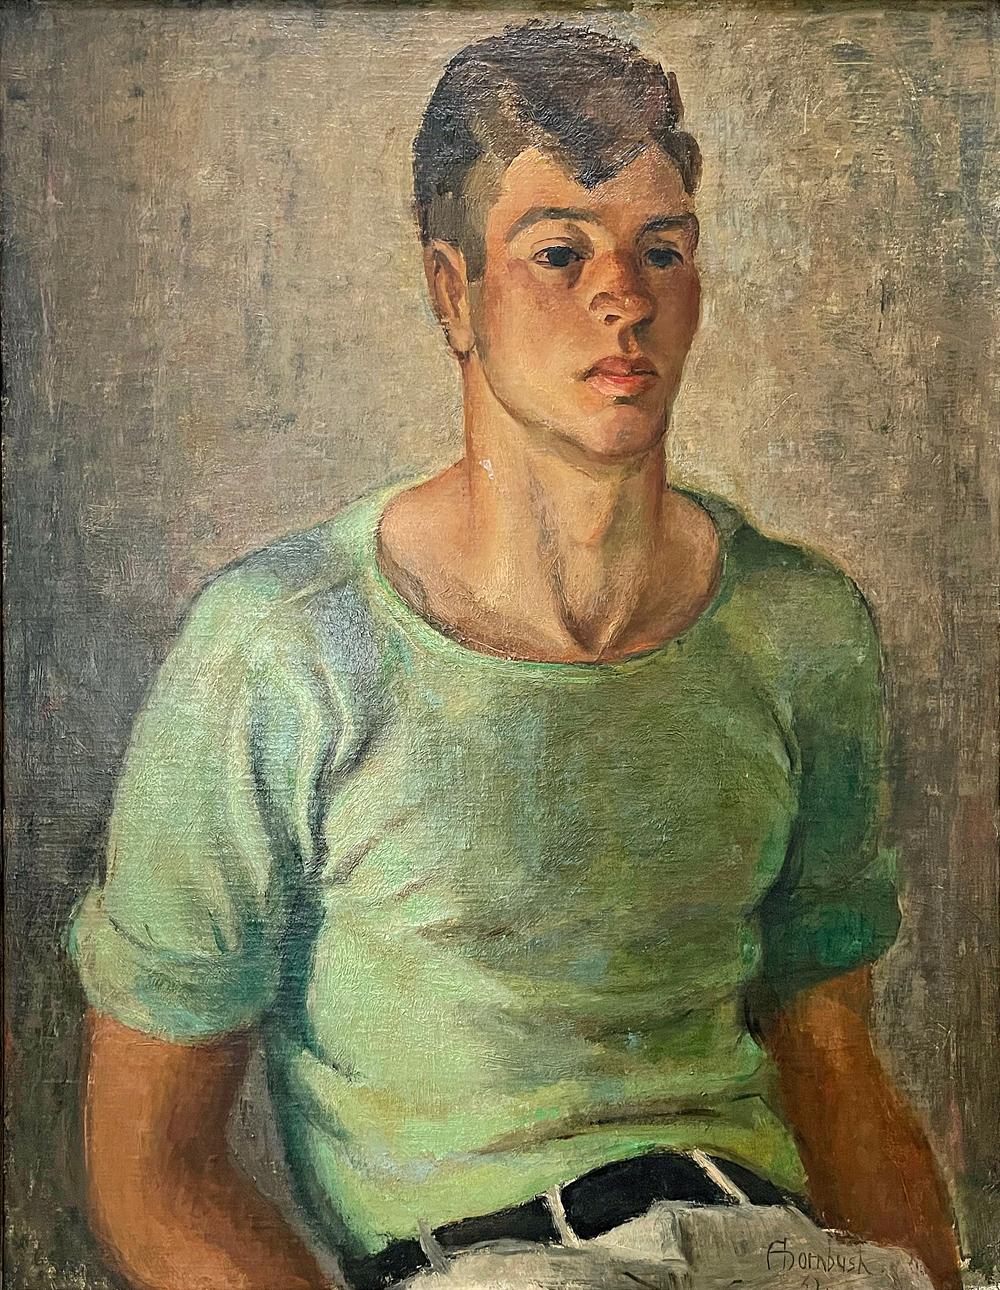 Enormously important both artistically and historically, this stunning Social Realist portrait of a young man in a green shirt was painted by Adrian Dornbush, the director of the Stone City art colony in Iowa, founded in 1932 by Dornbush along with